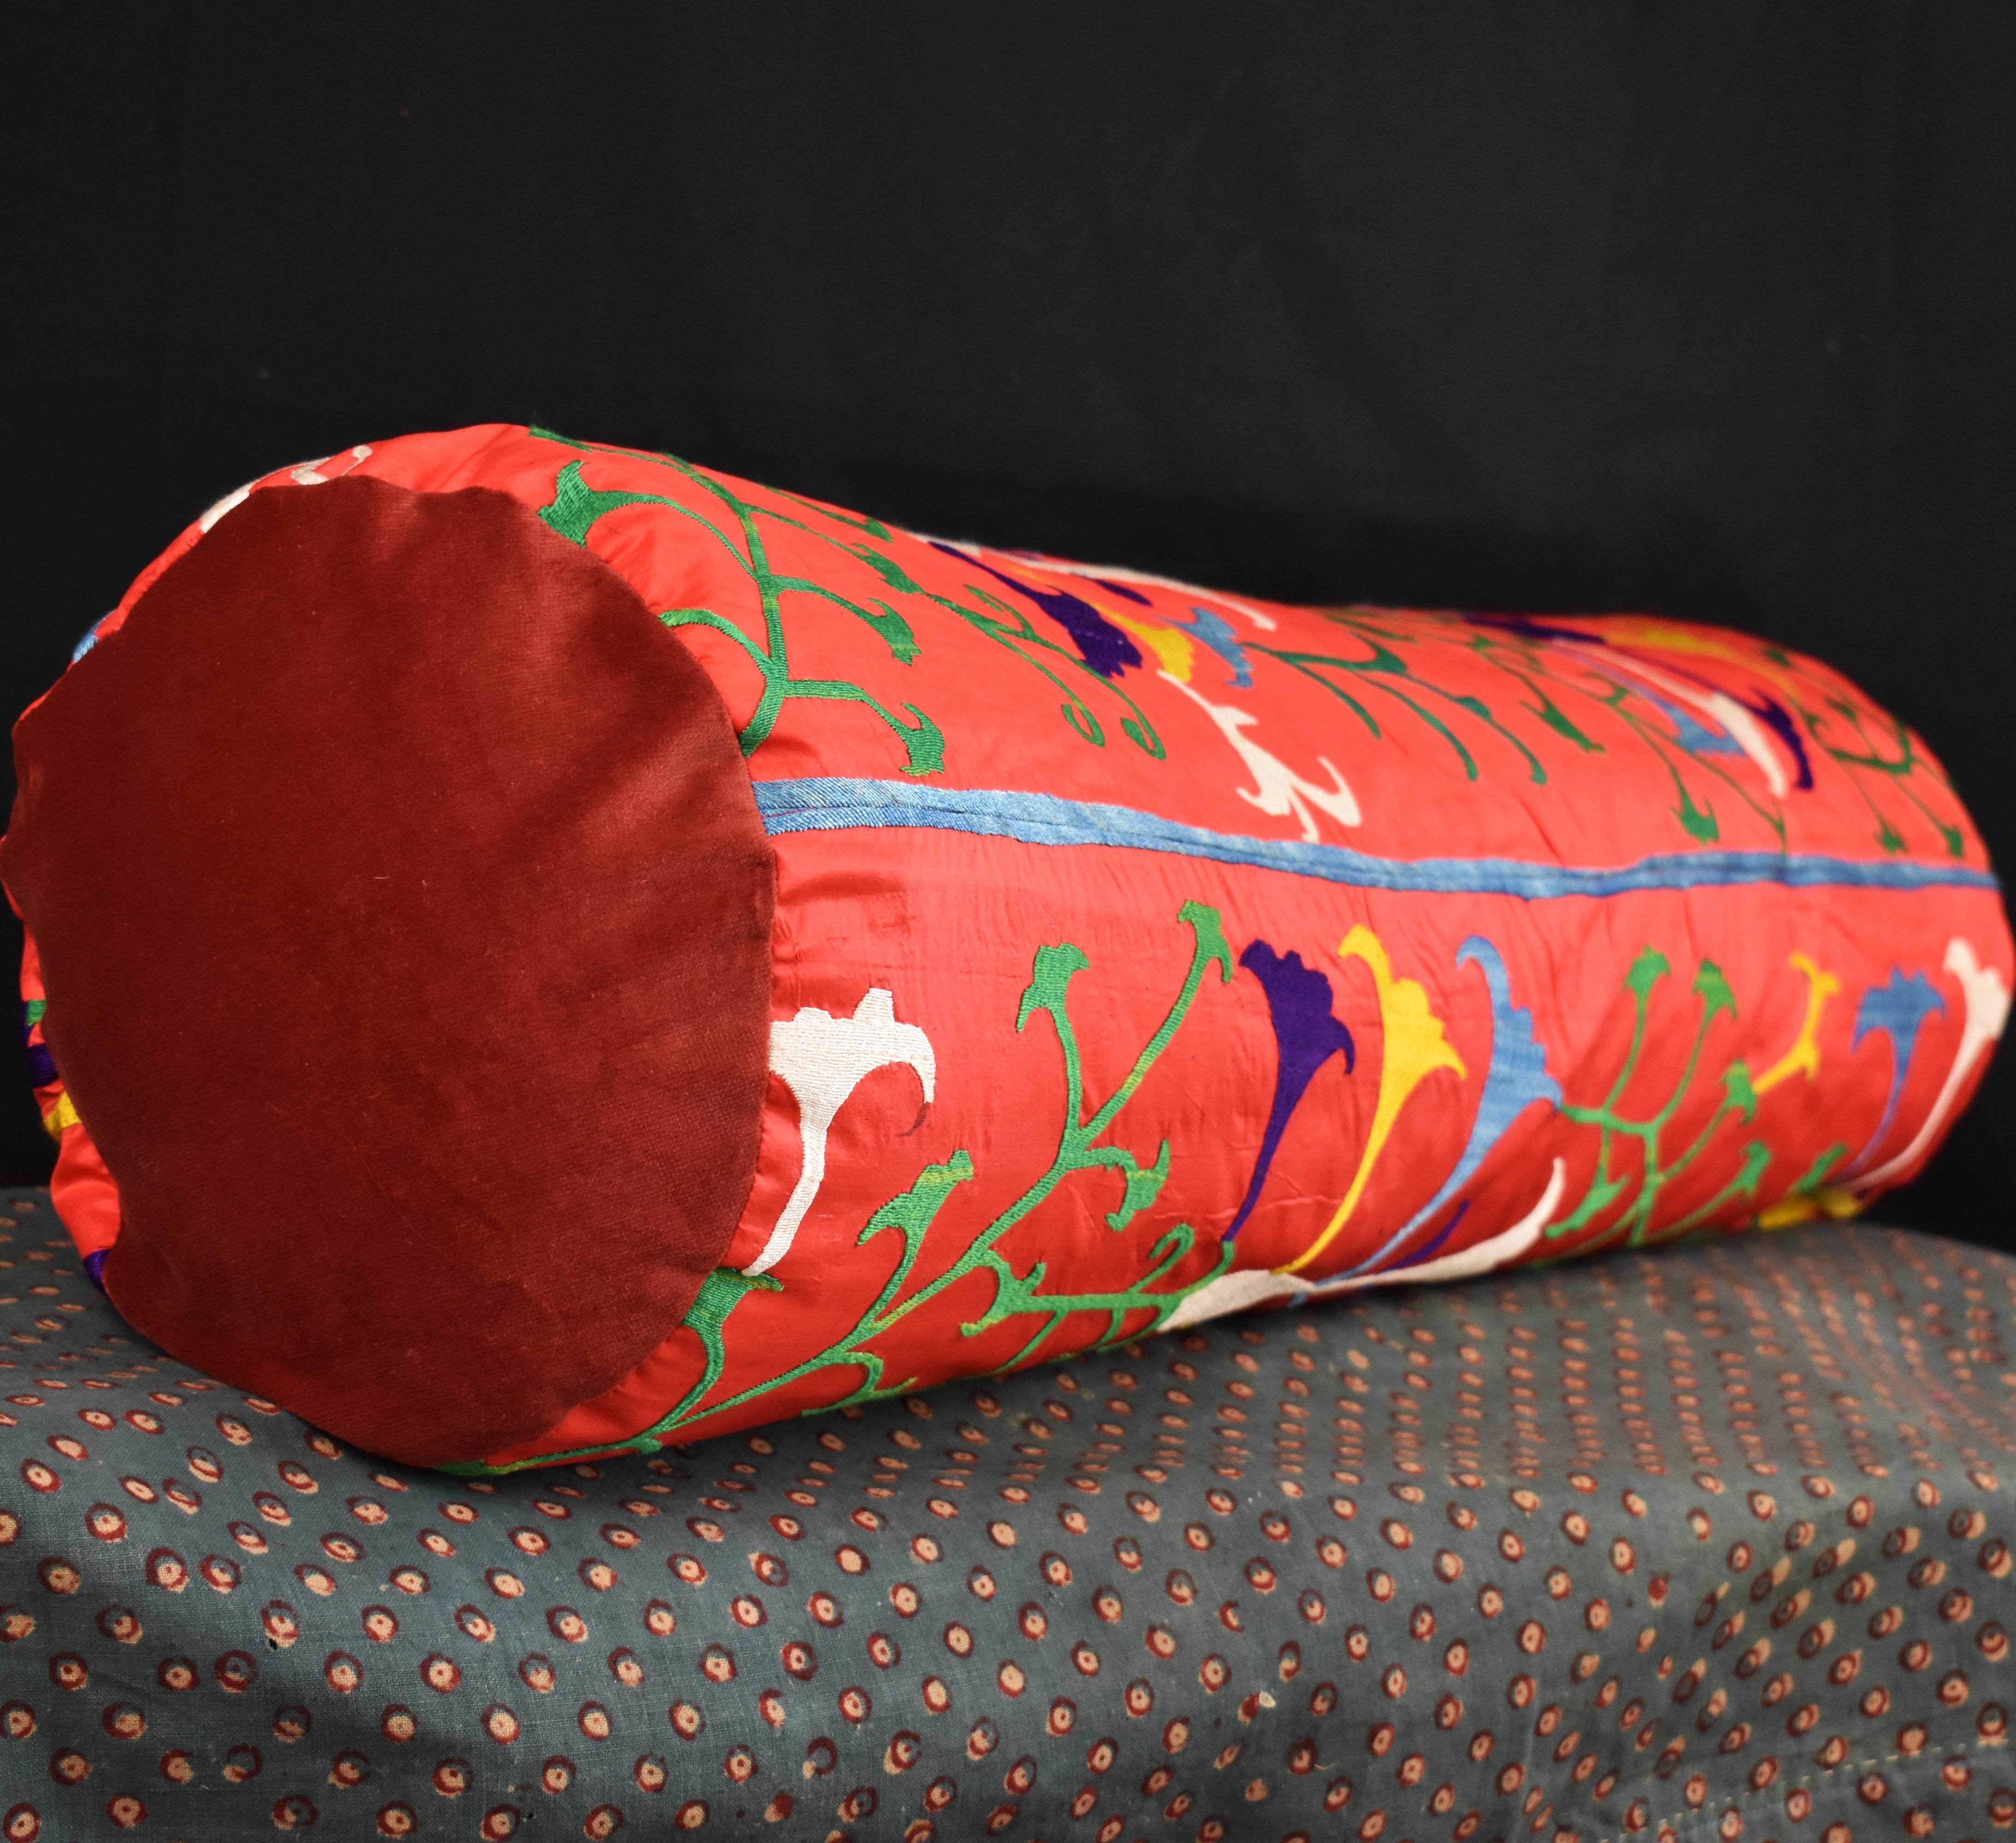 Red silk cushion made in Uzbekistan by the Lakai people, talented artisans
from 19th century embroidered silk.
This cushion closes with a zip and comes with an unfilled liner for easy filling.